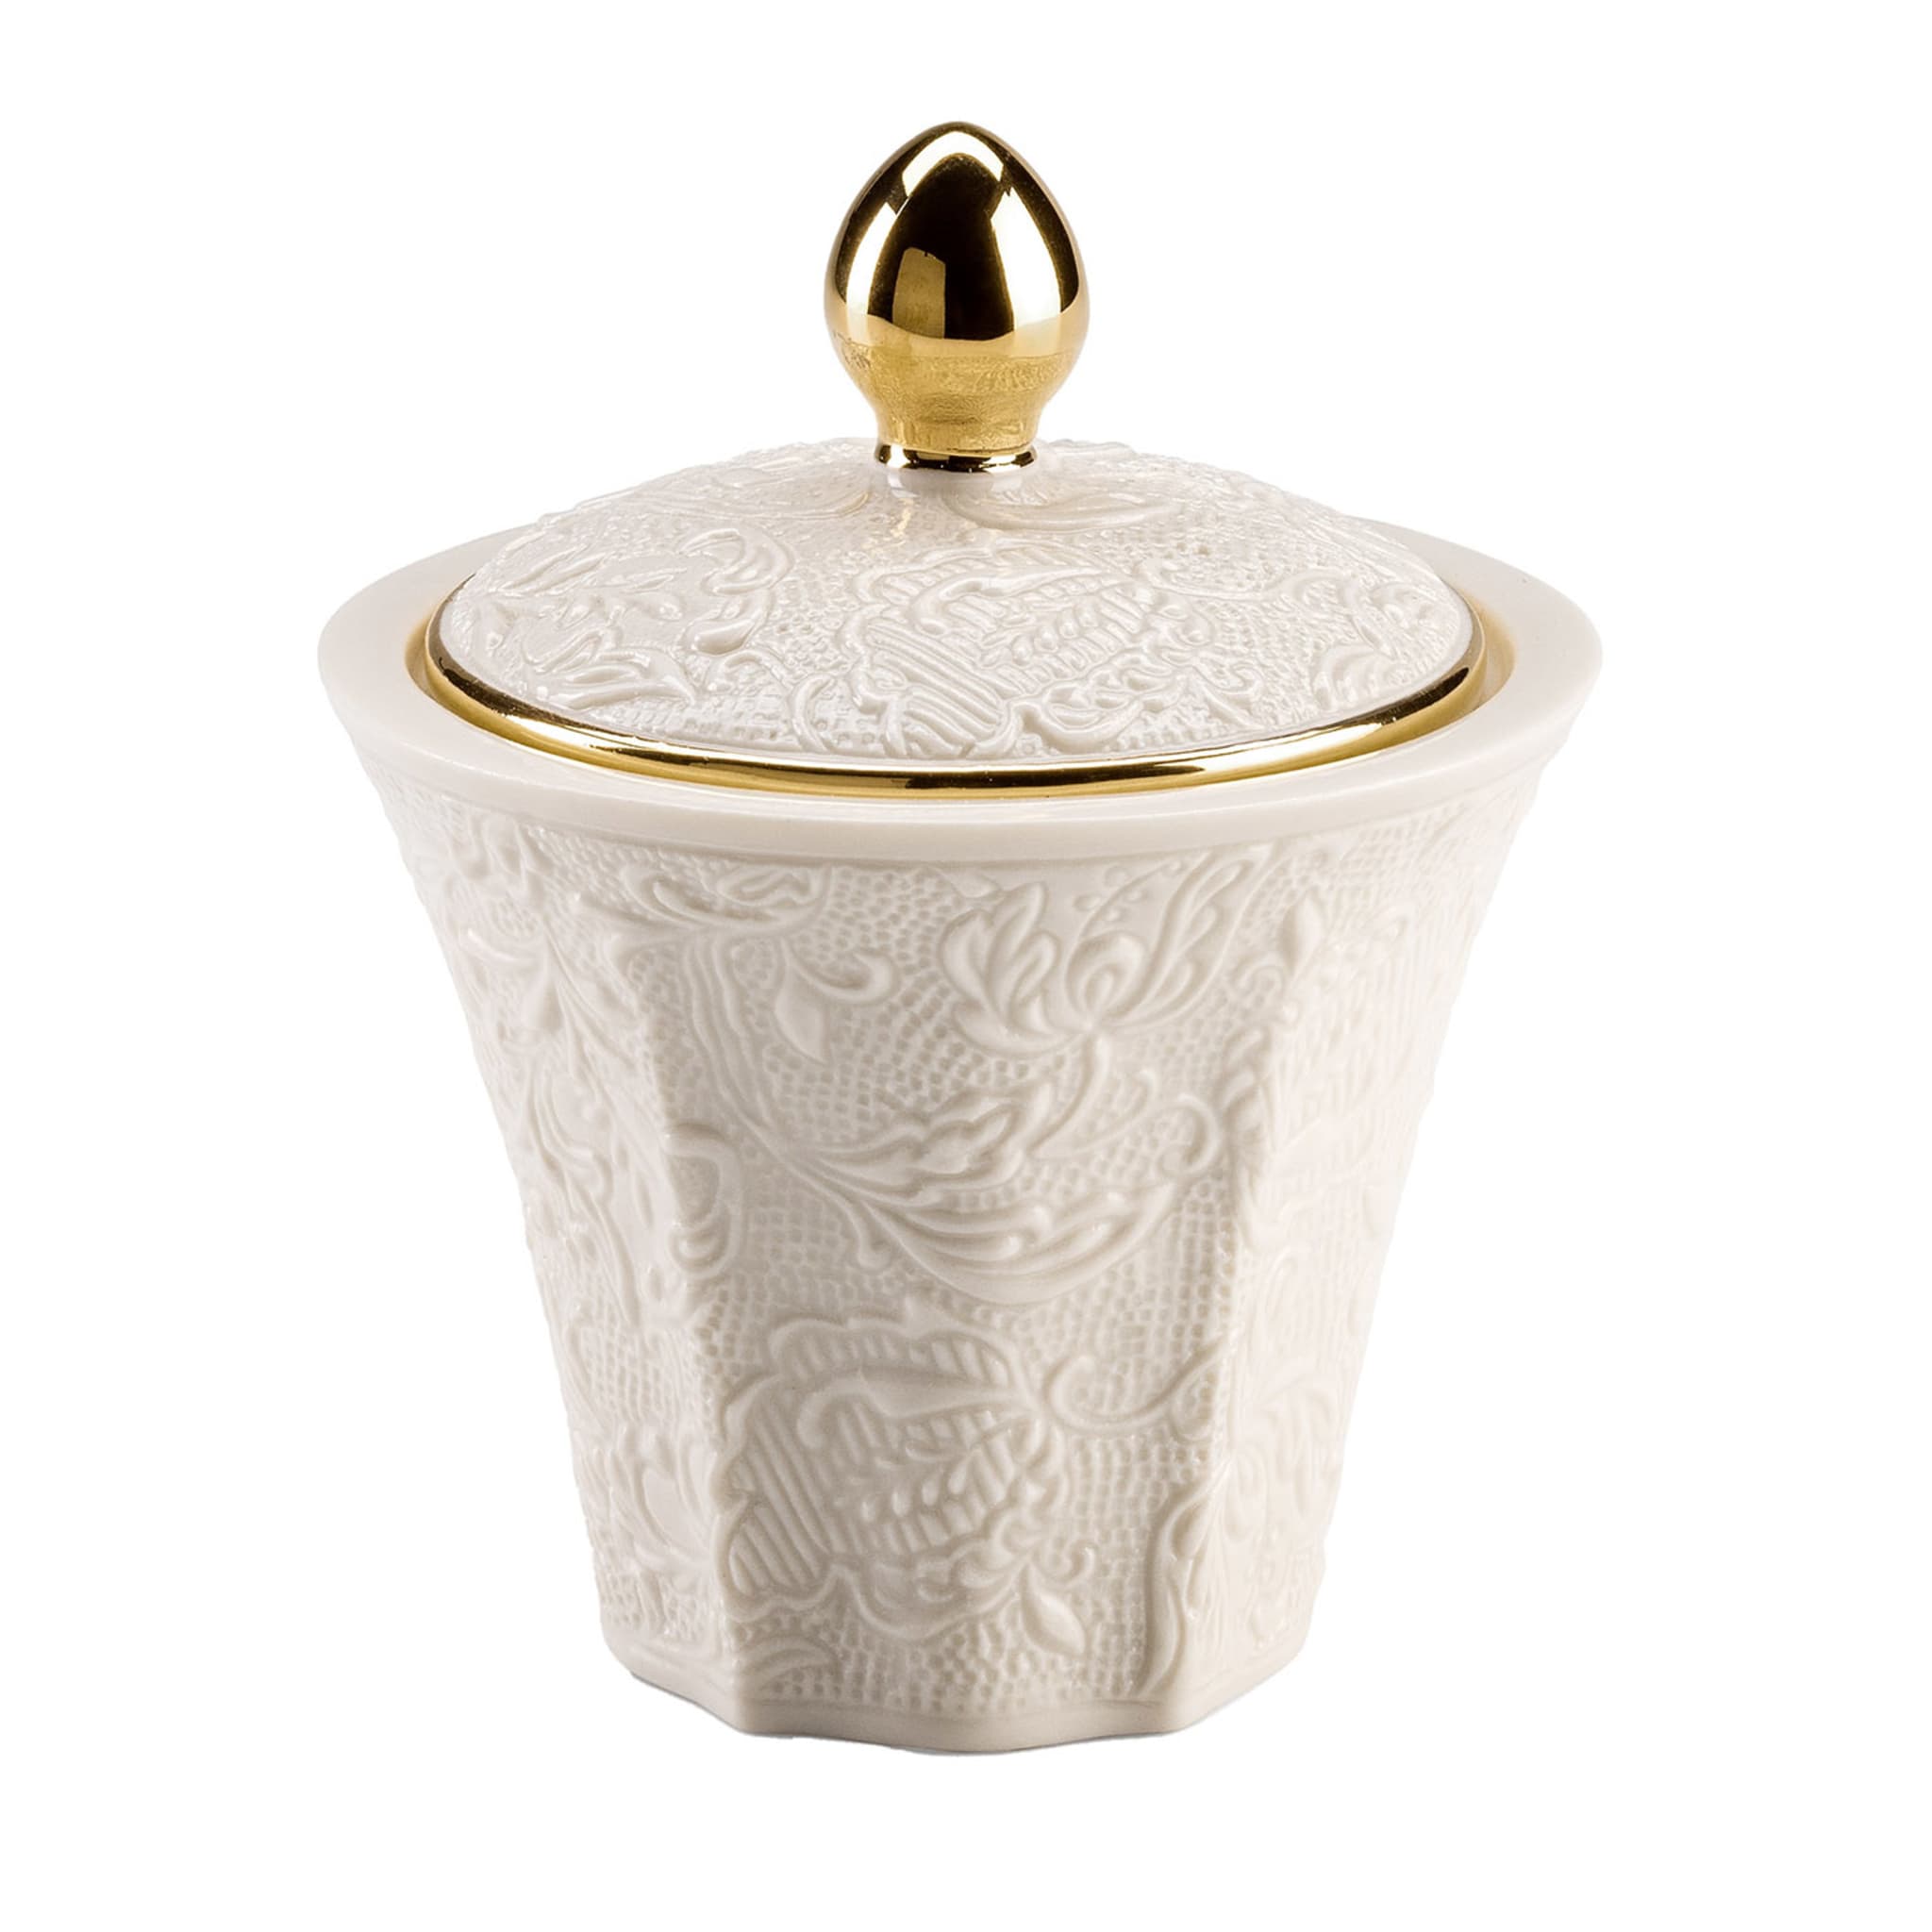 Damasco White & Gold Sugar Bowl with Lid - Main view